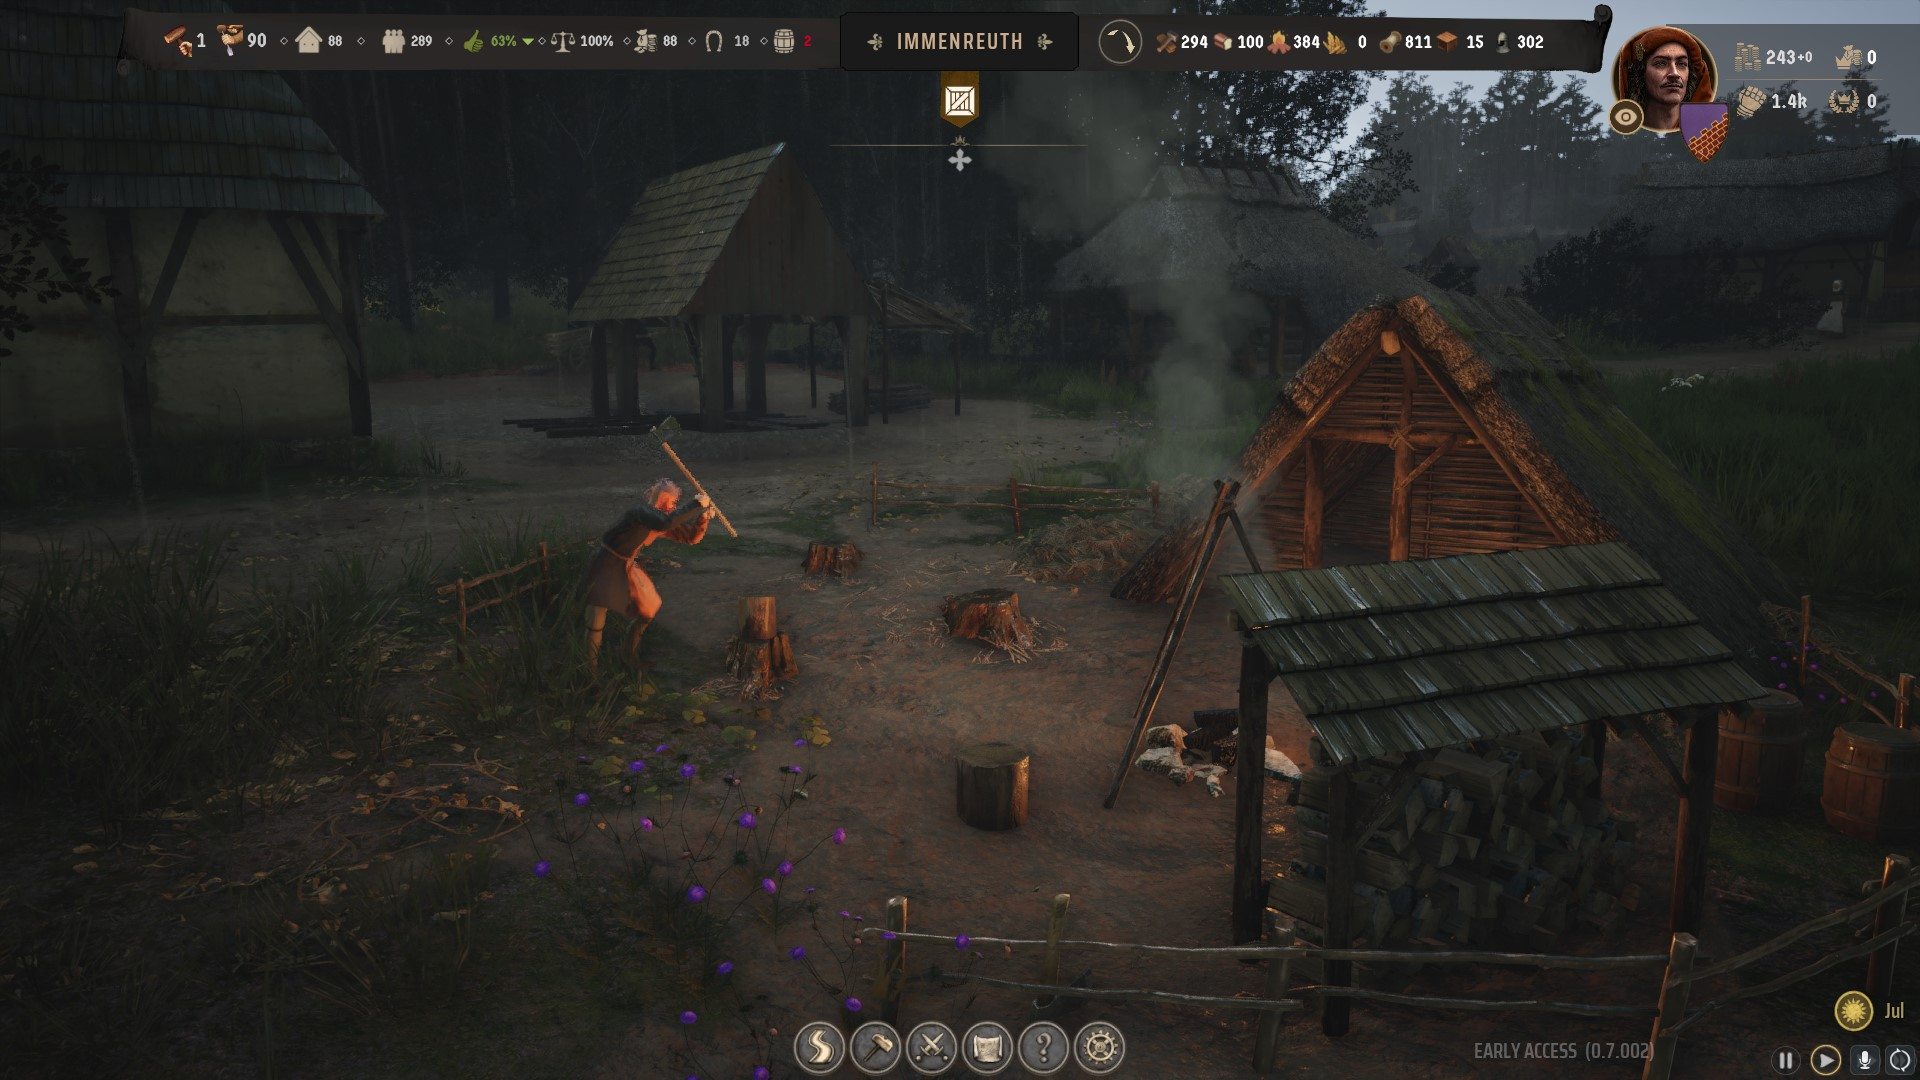 A woodcutter working next to his hut in the game Manor Lords